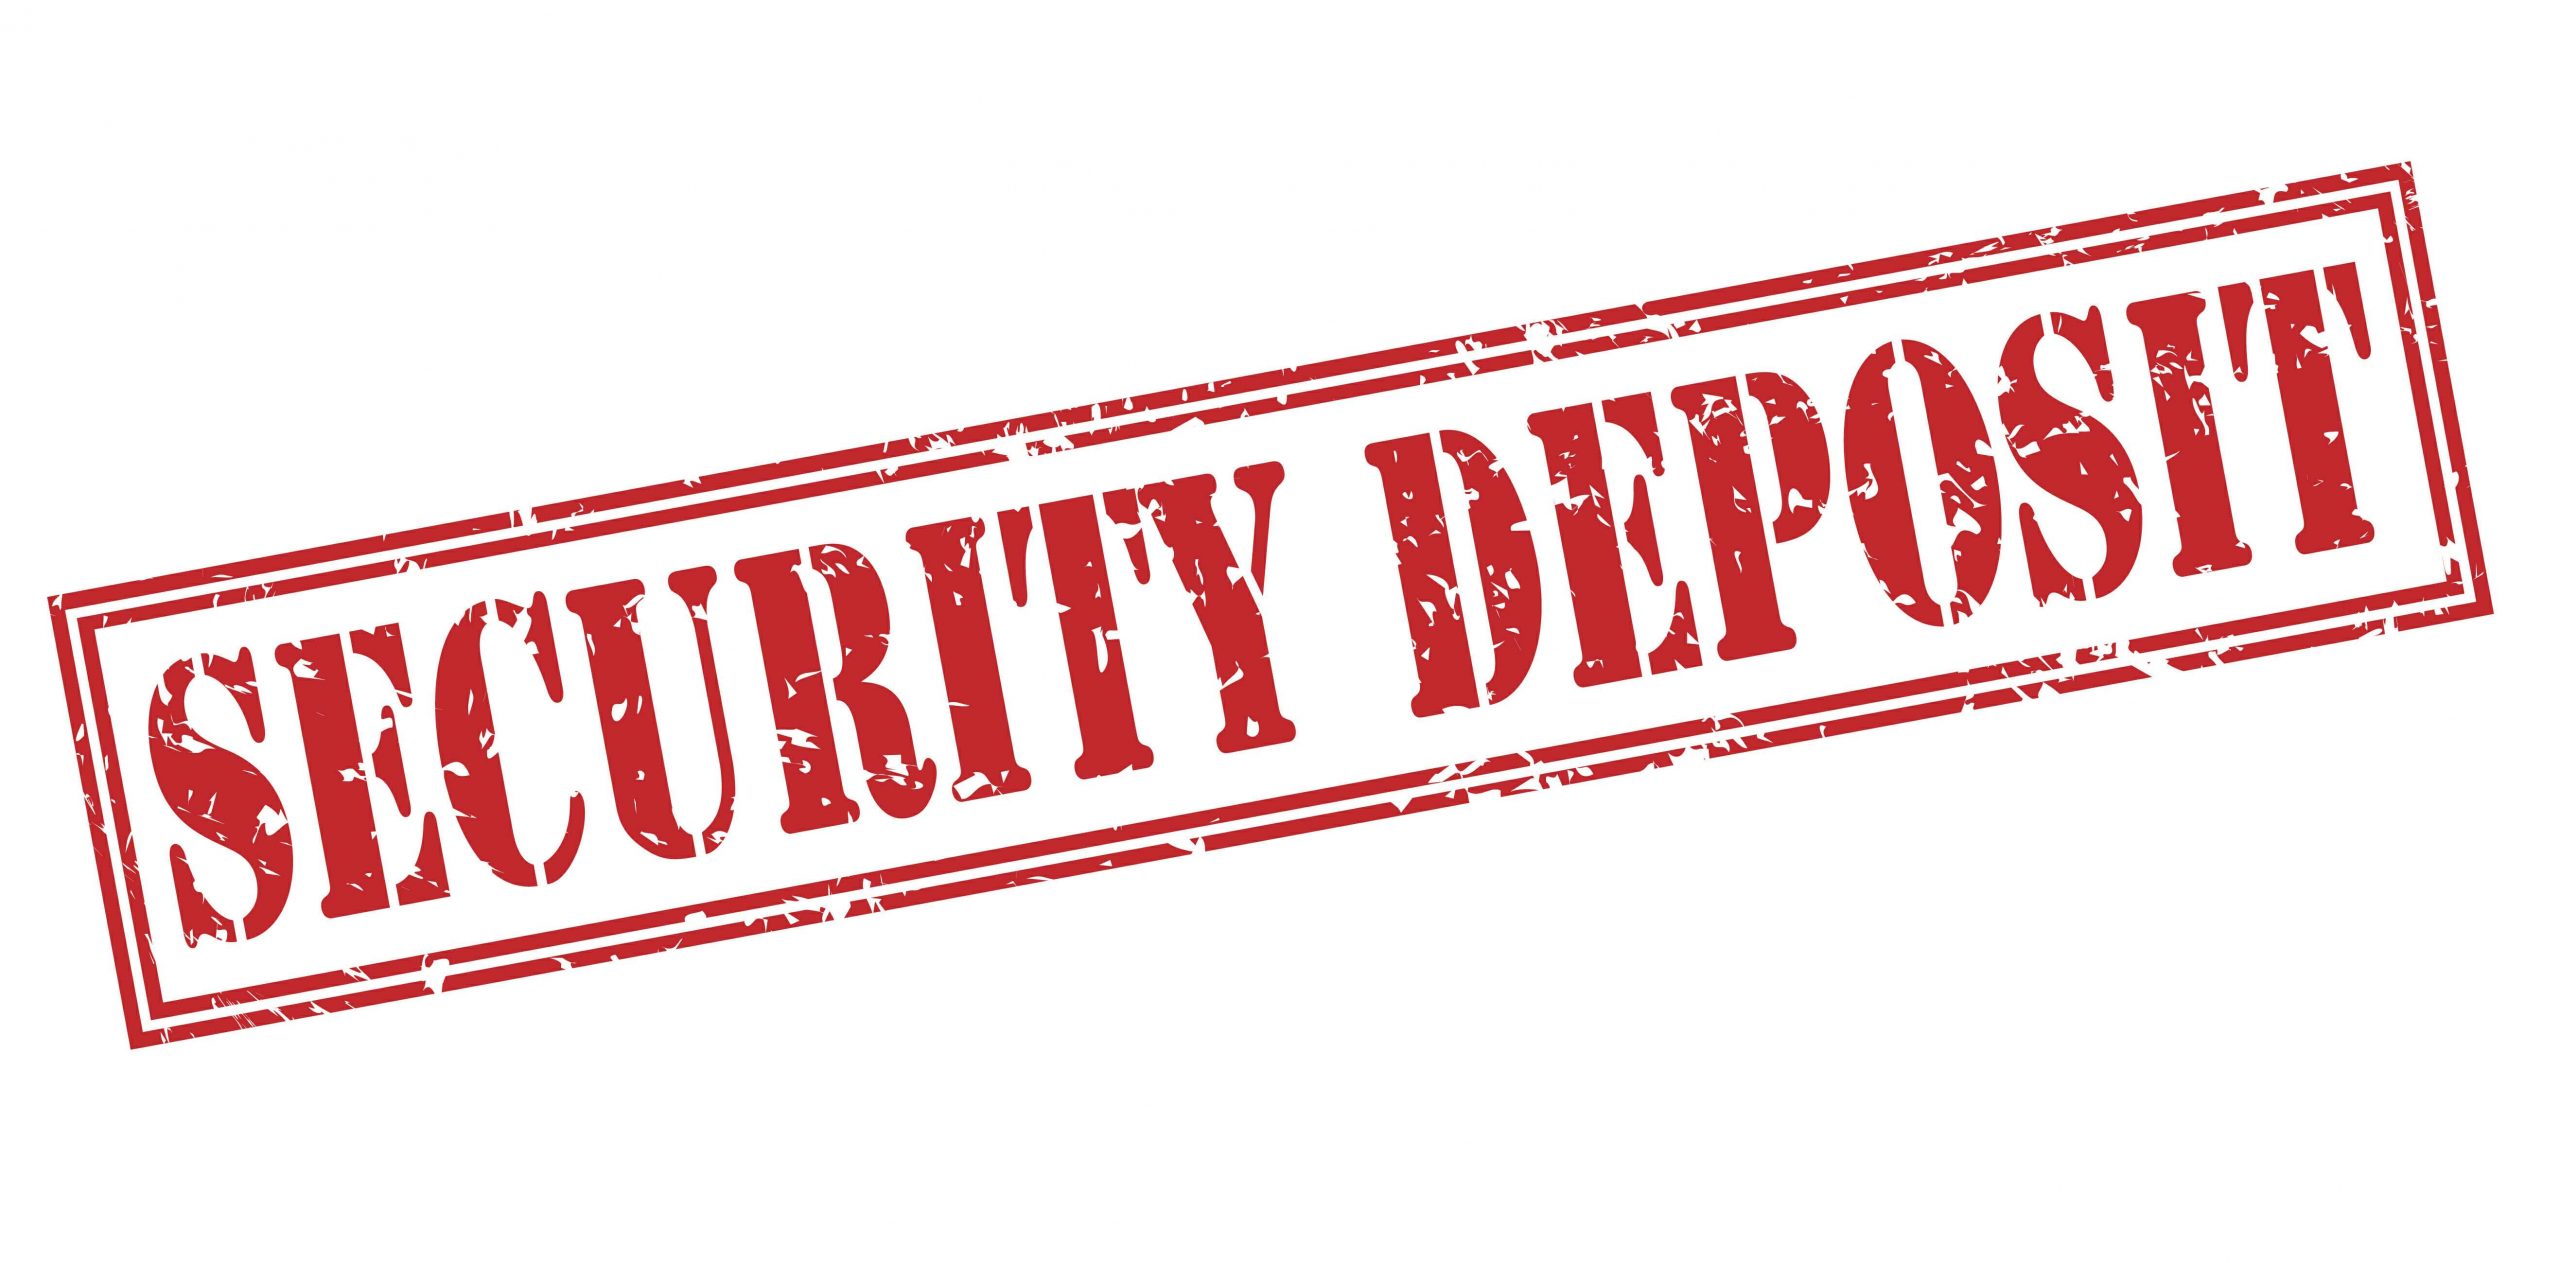 A tenant's security deposit is used for a landlord to cover either unpaid rent or wear and tear on the premises. A property manager may require the security deposit in the rental agreement. The security deposit works by allowing for collection after the renter moves for damages beyond ordinary wear and tear or to cover rent.